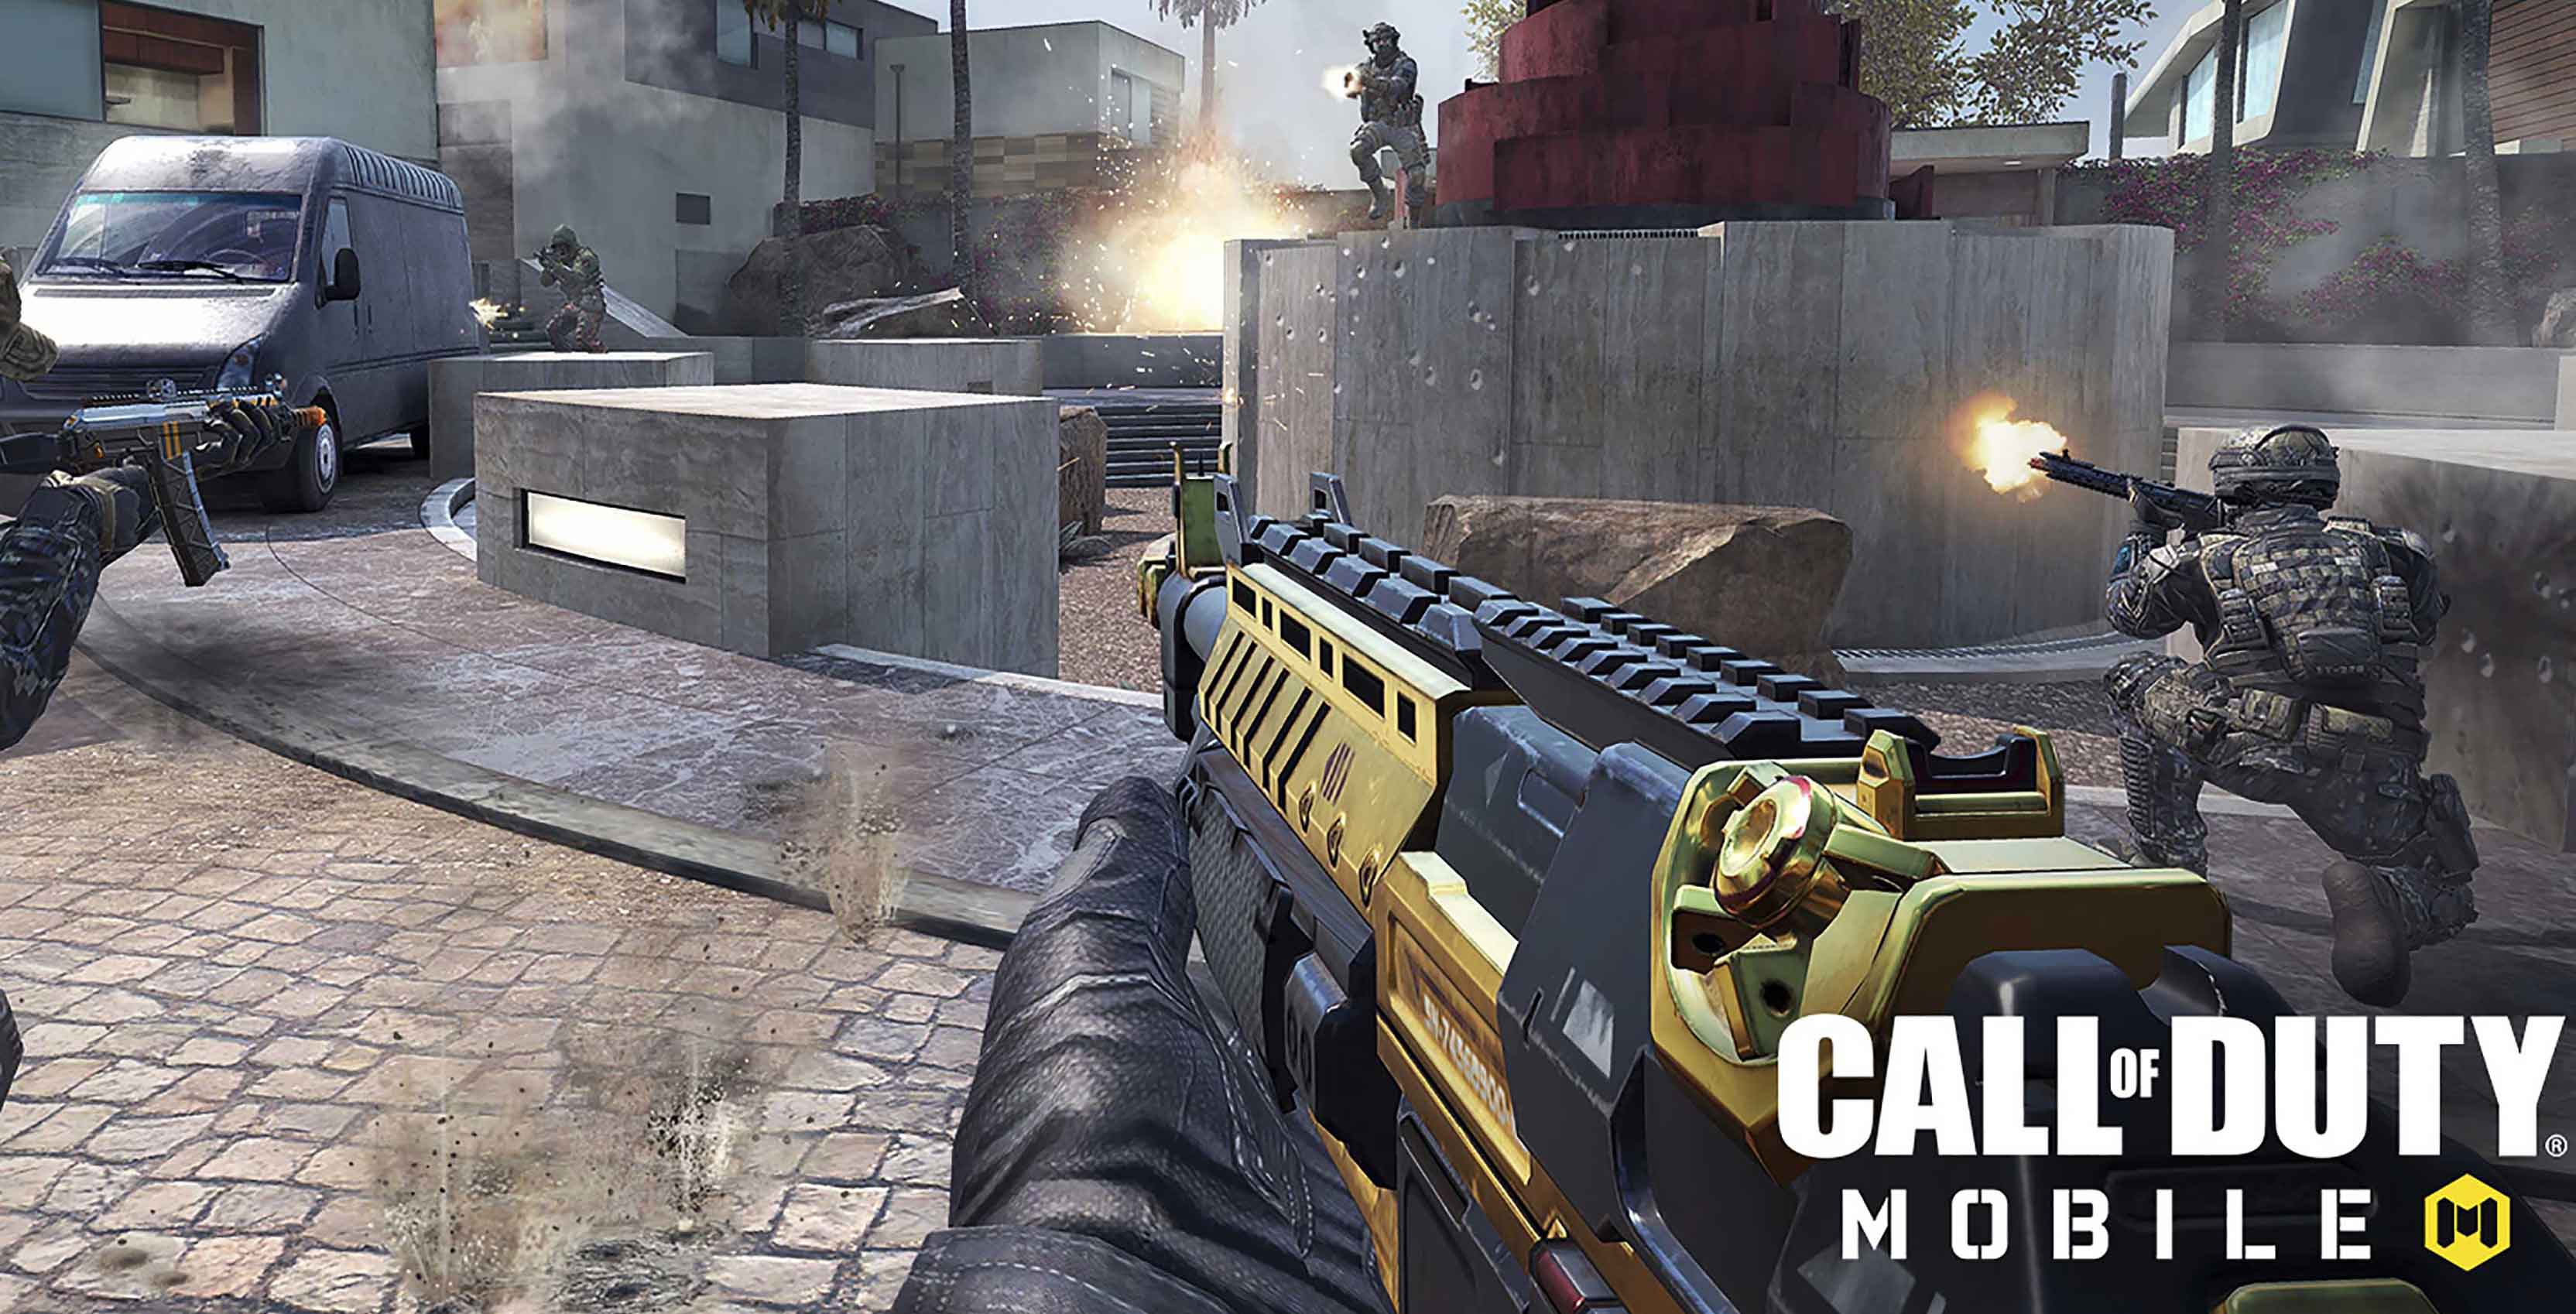 Call of duty mobile cod. Call of Duty mobile. Игра Call of Duty mobile 2. Call of Duty mobile фото. Call of Duty 8.